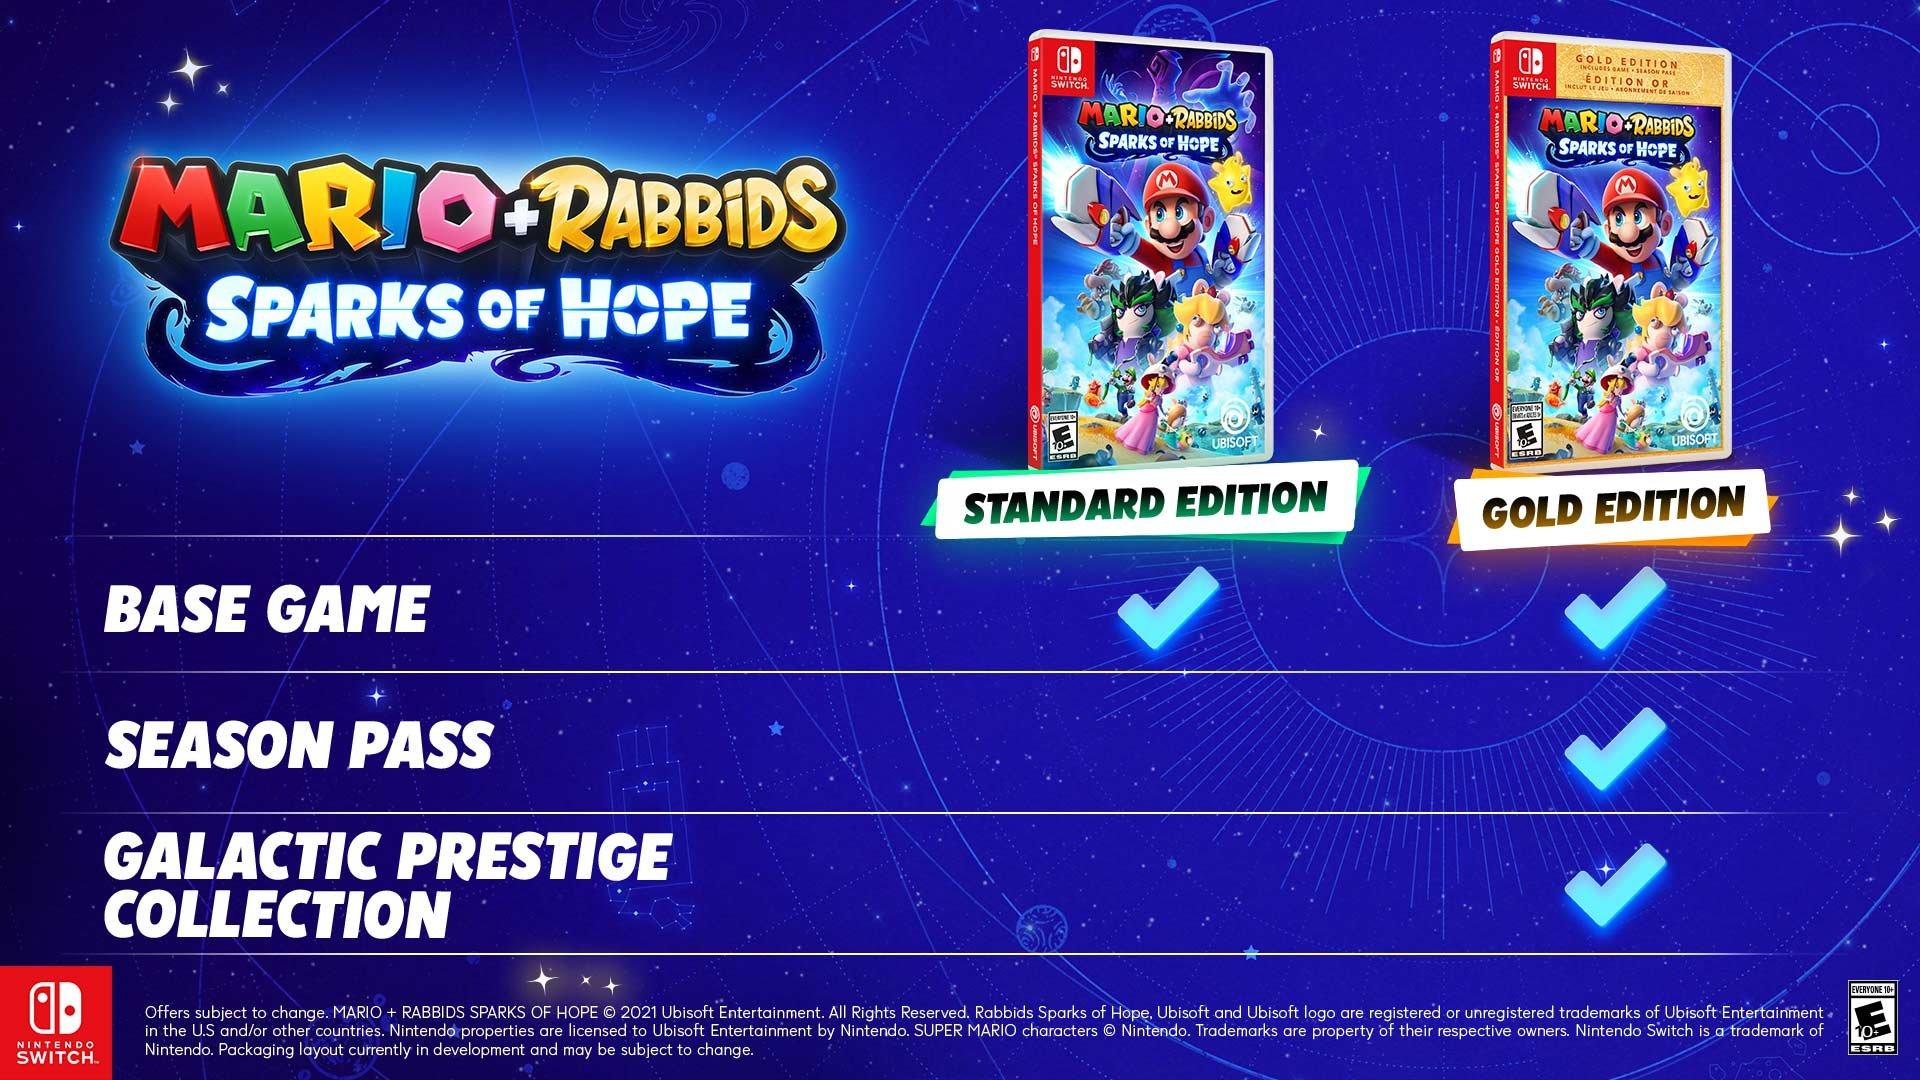 Mario Plus Rabbids Sparks of Hope Gold Edition - Nintendo Switch